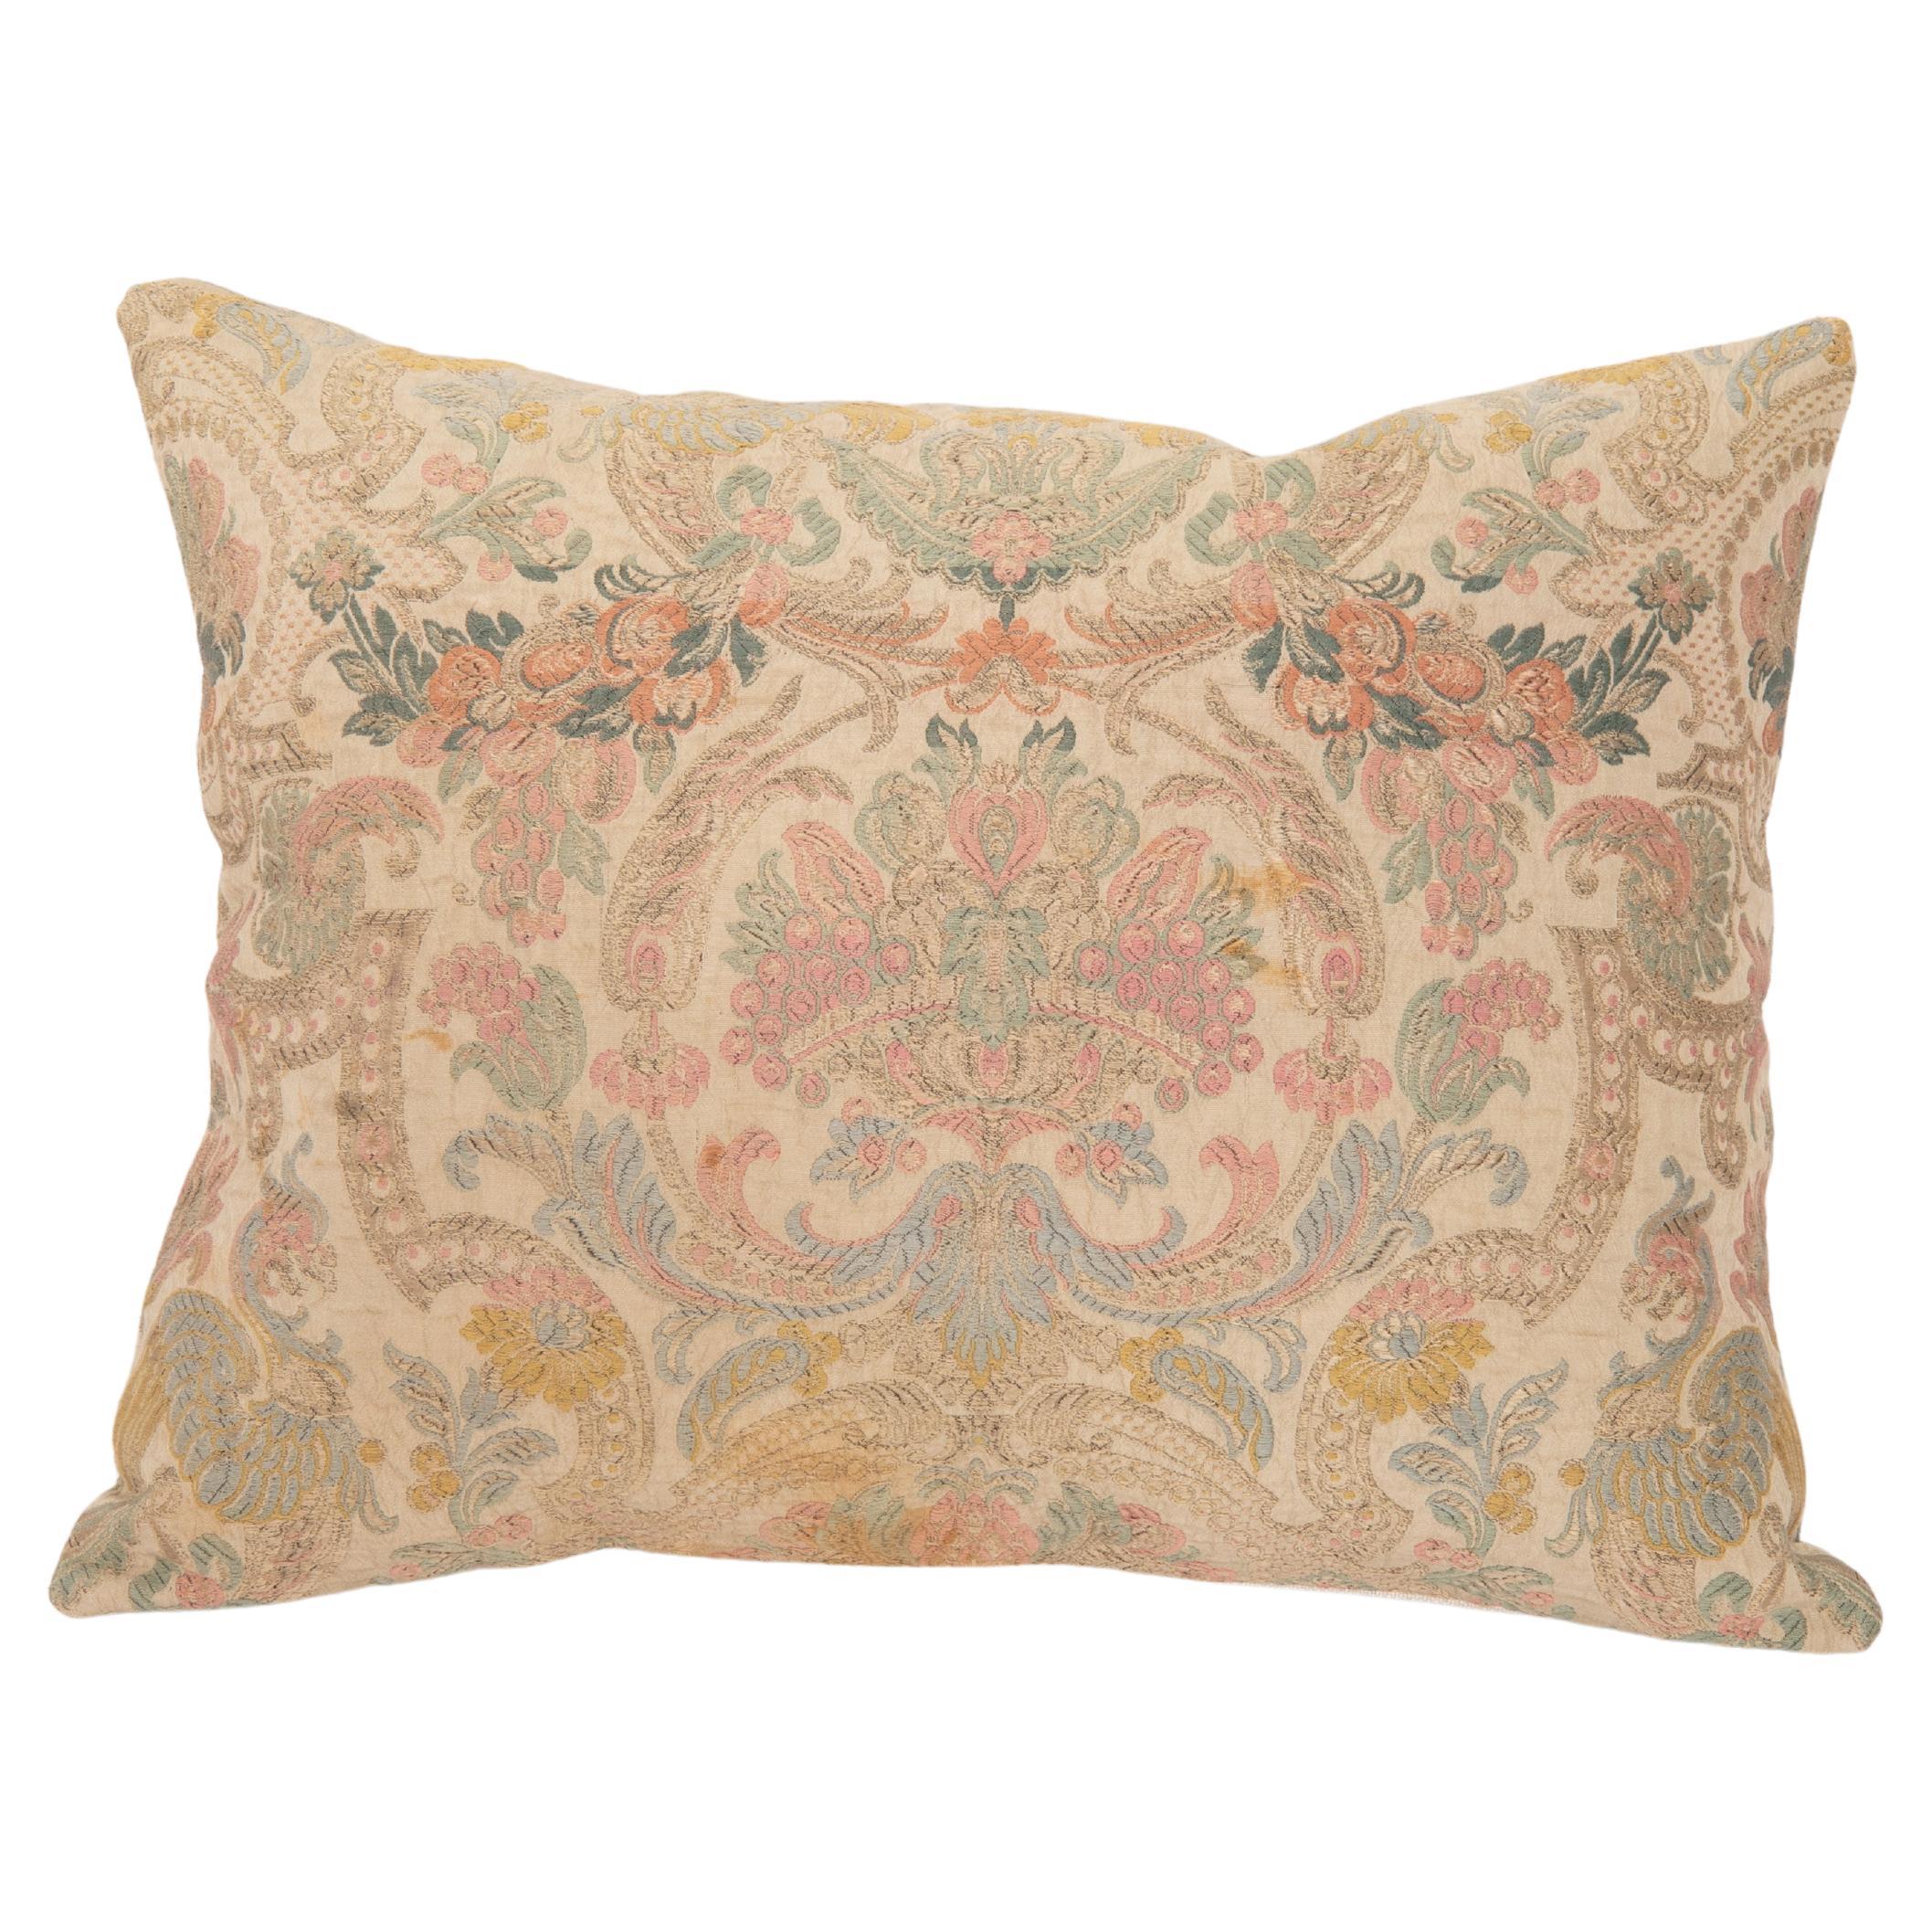 Pillow Cover Made from an Early 20th C. European Textile